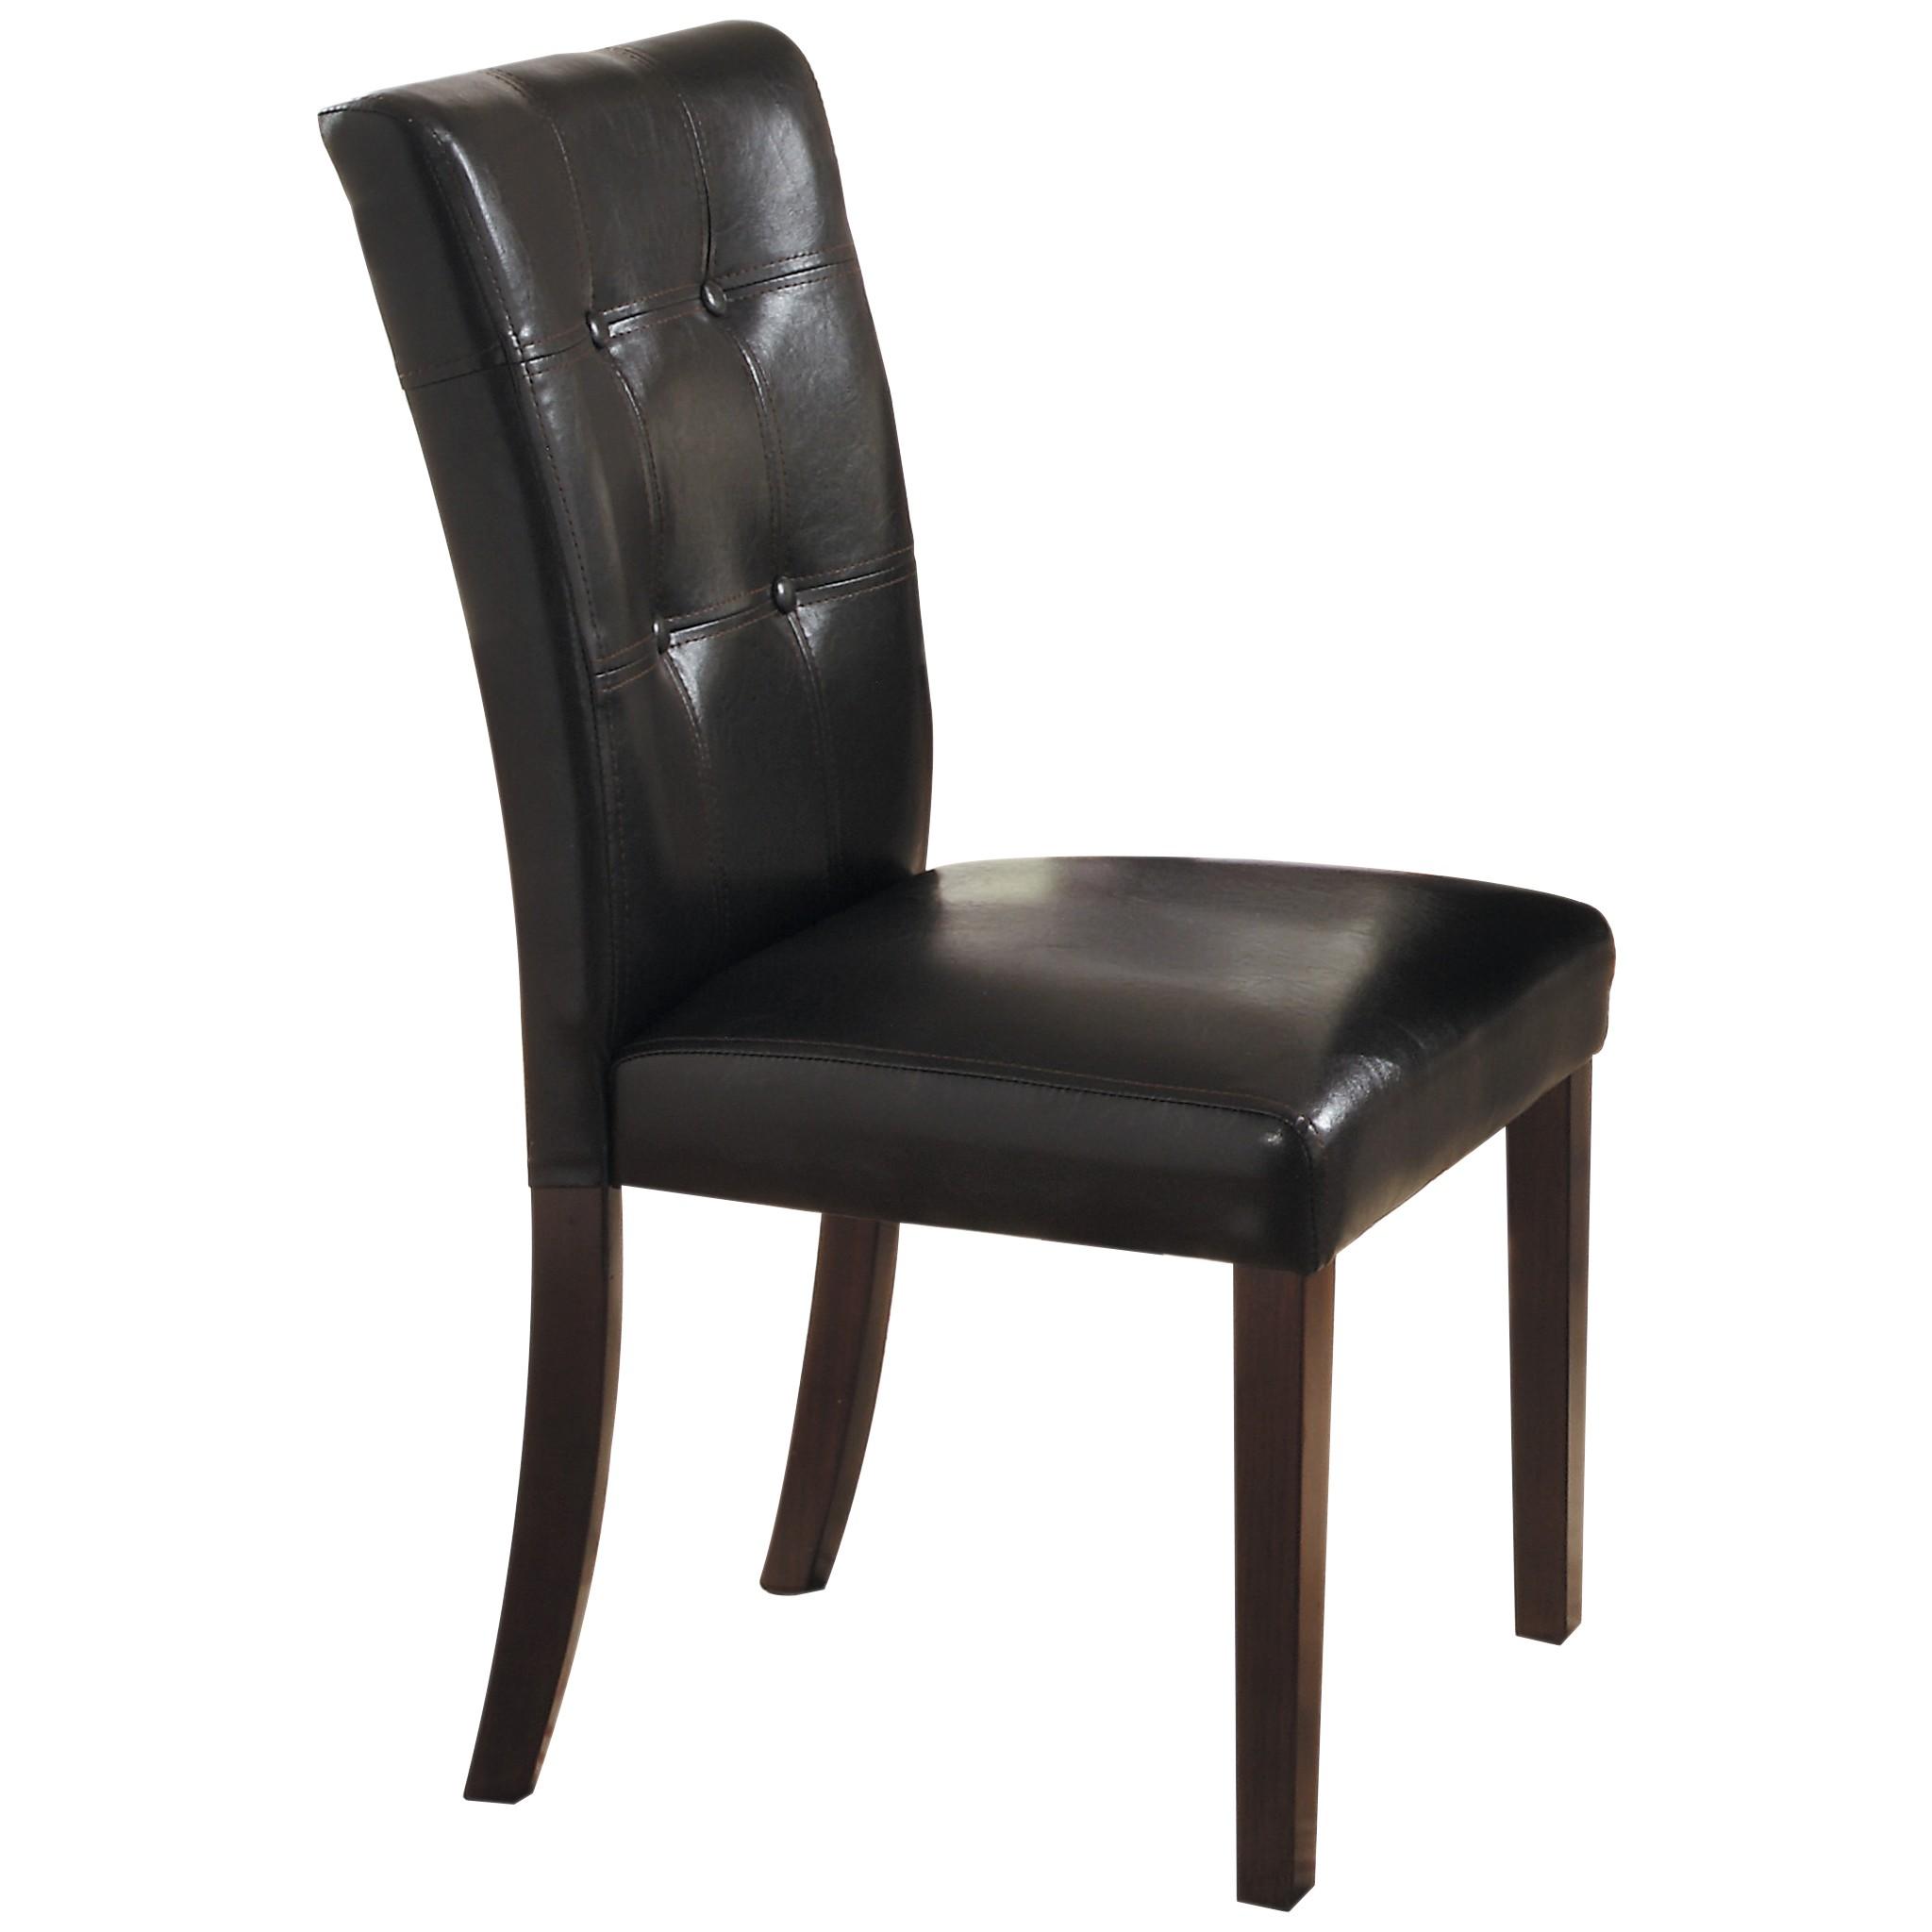 Transitional Side Chair Set 2544S Teague 2544S in Espresso Faux Leather